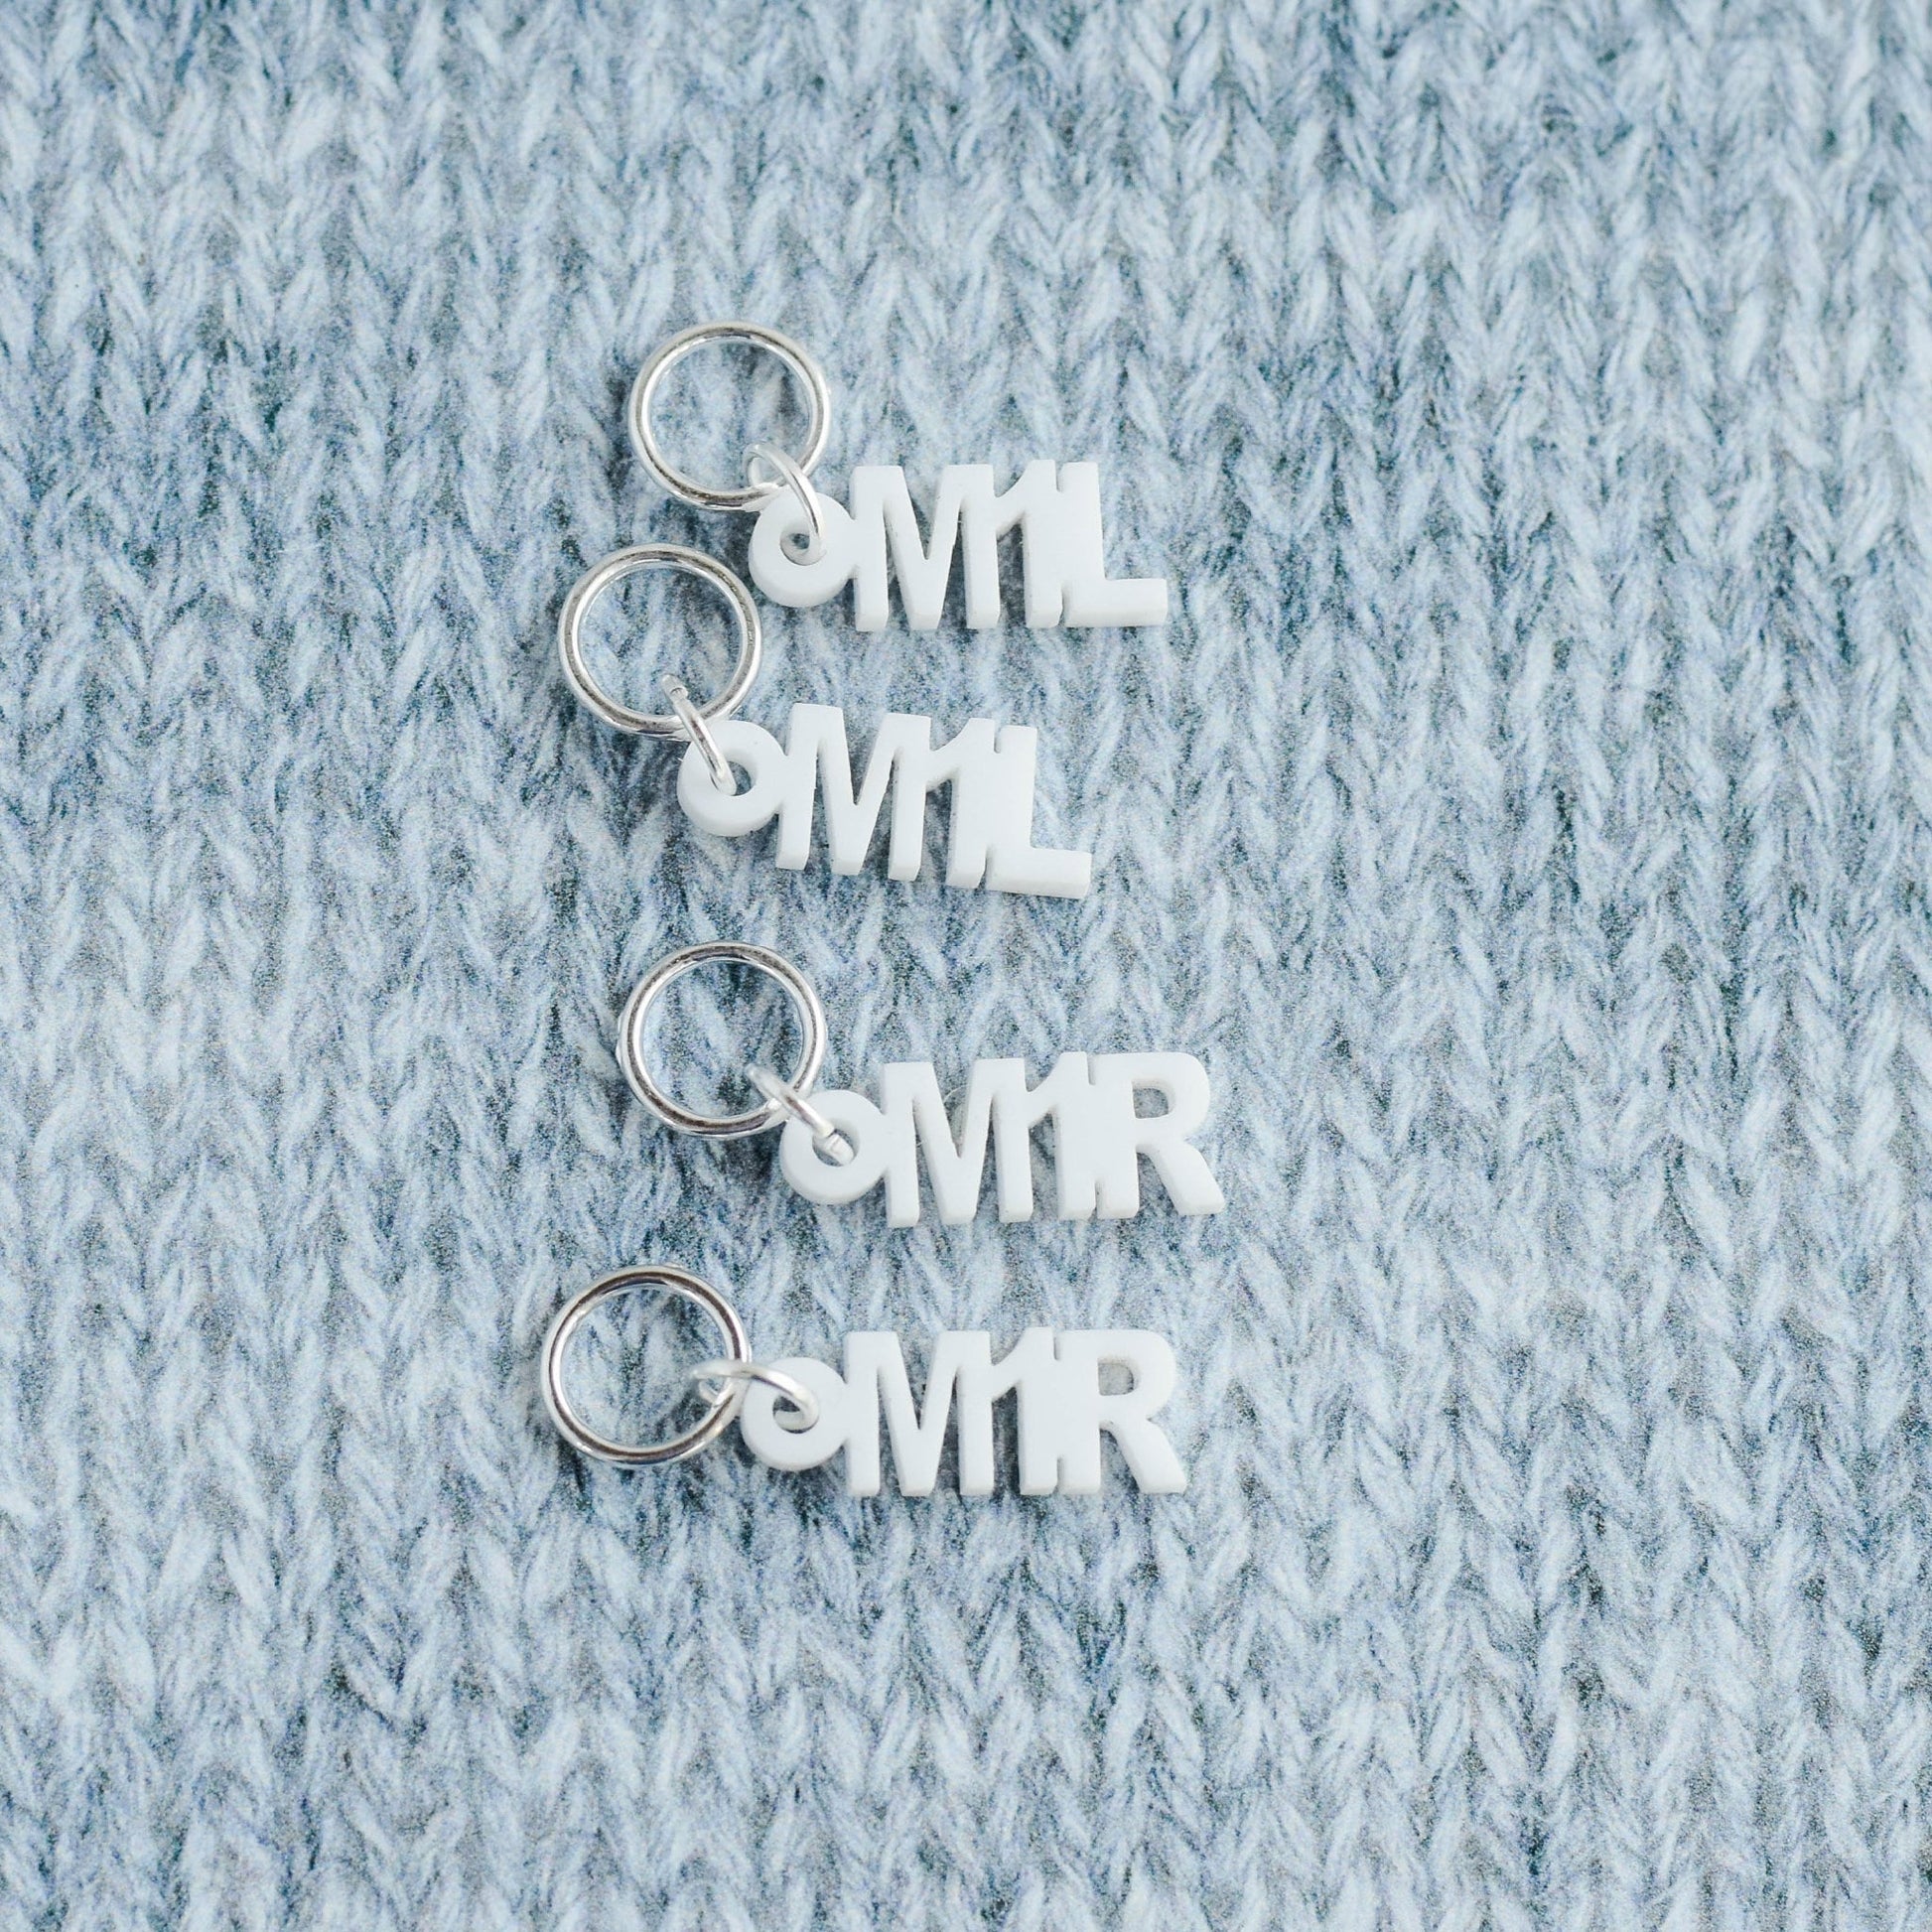 Set of 4 Stitch Markers, M1L and M1R, Laser Engraved Acrylic Stitch Markers, Increase Stitch Markers - White